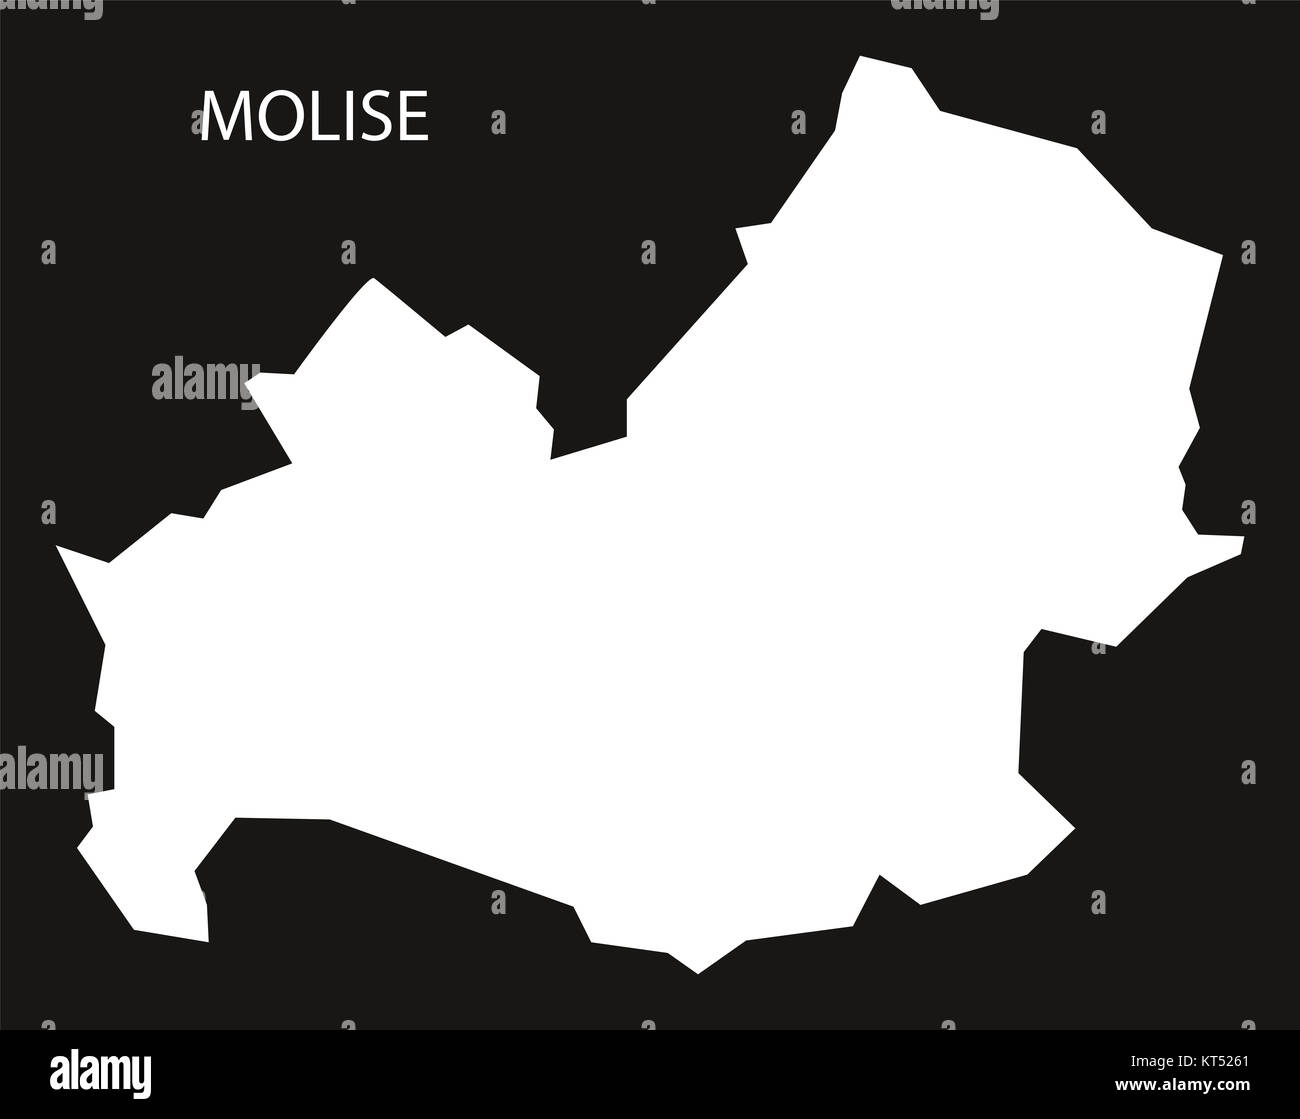 Molise Italy Map black inverted silhouette Stock Photo